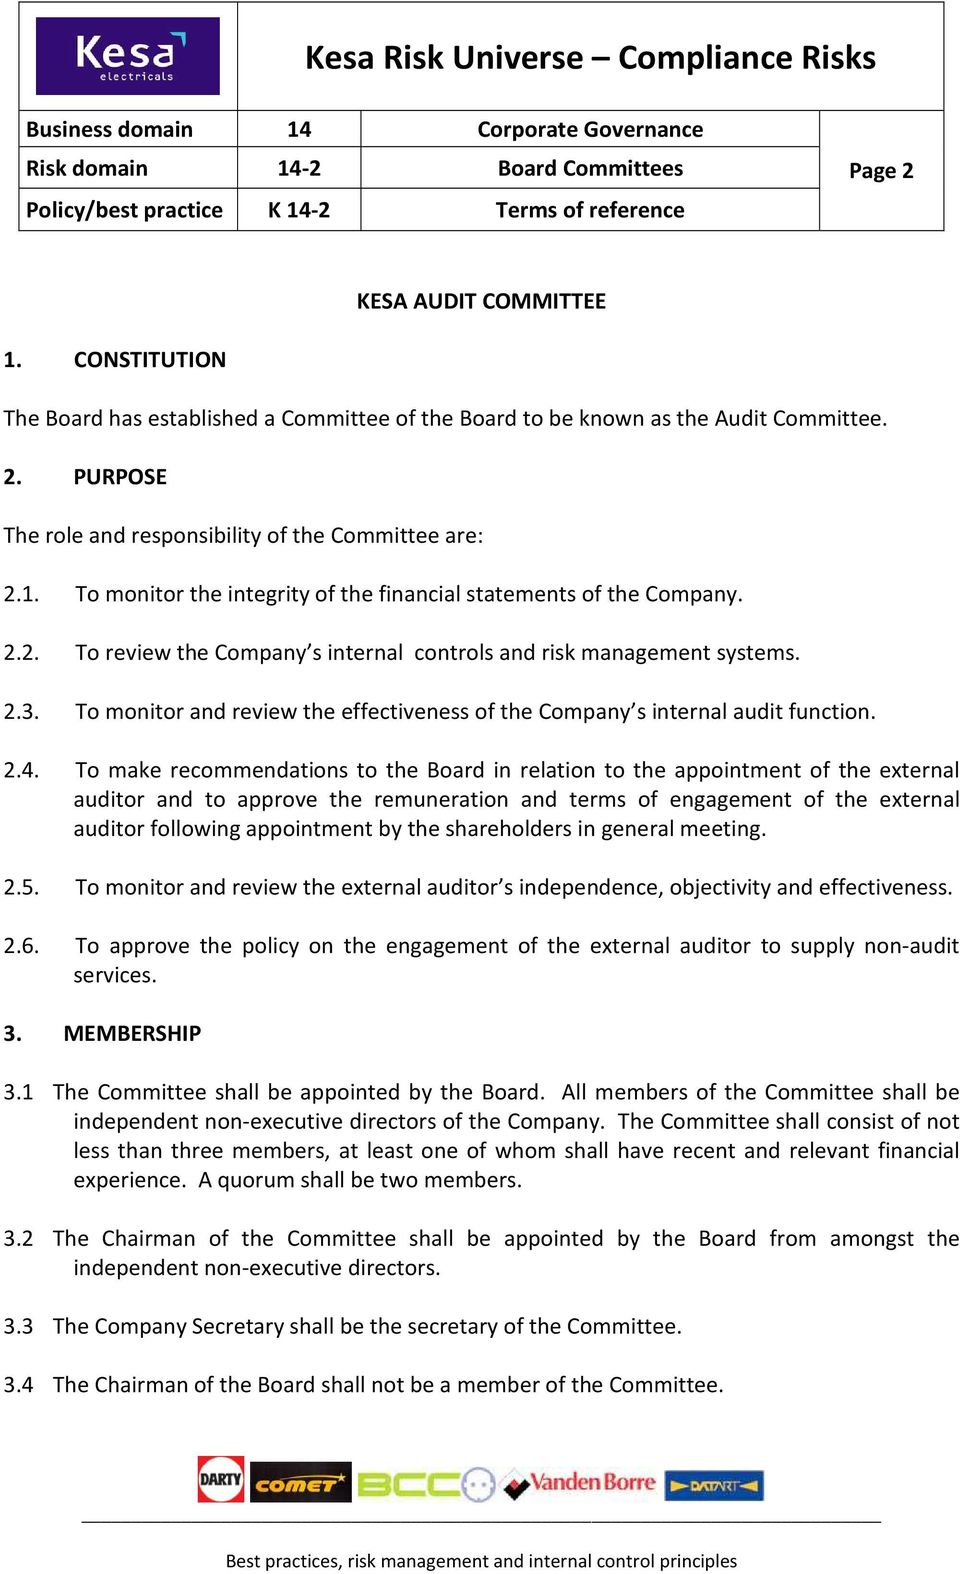 To make recommendations to the Board in relation to the appointment of the external auditor and to approve the remuneration and terms of engagement of the external auditor following appointment by